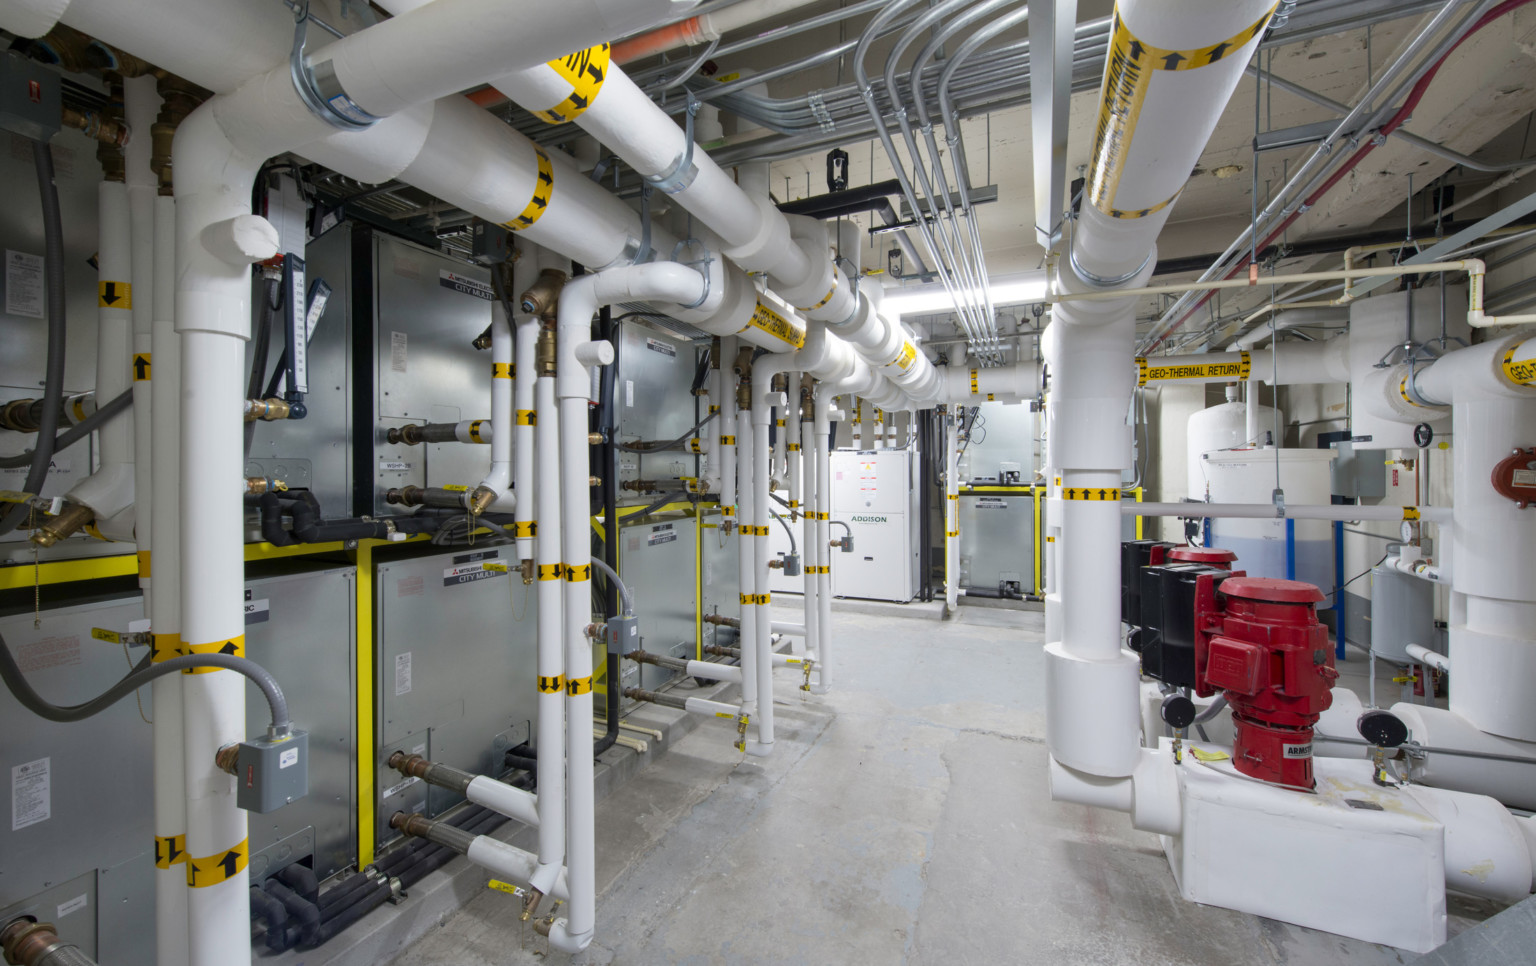 Basement with white and silver exposed pipes